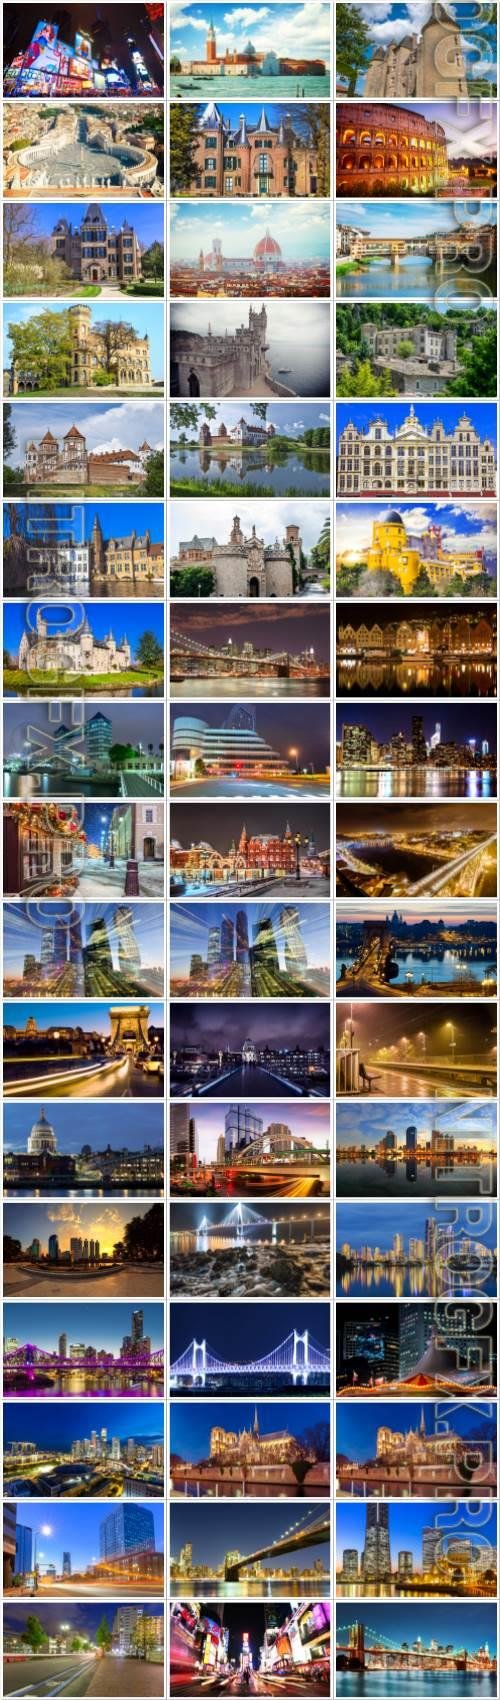 Cities and architecture large selection of stock photos